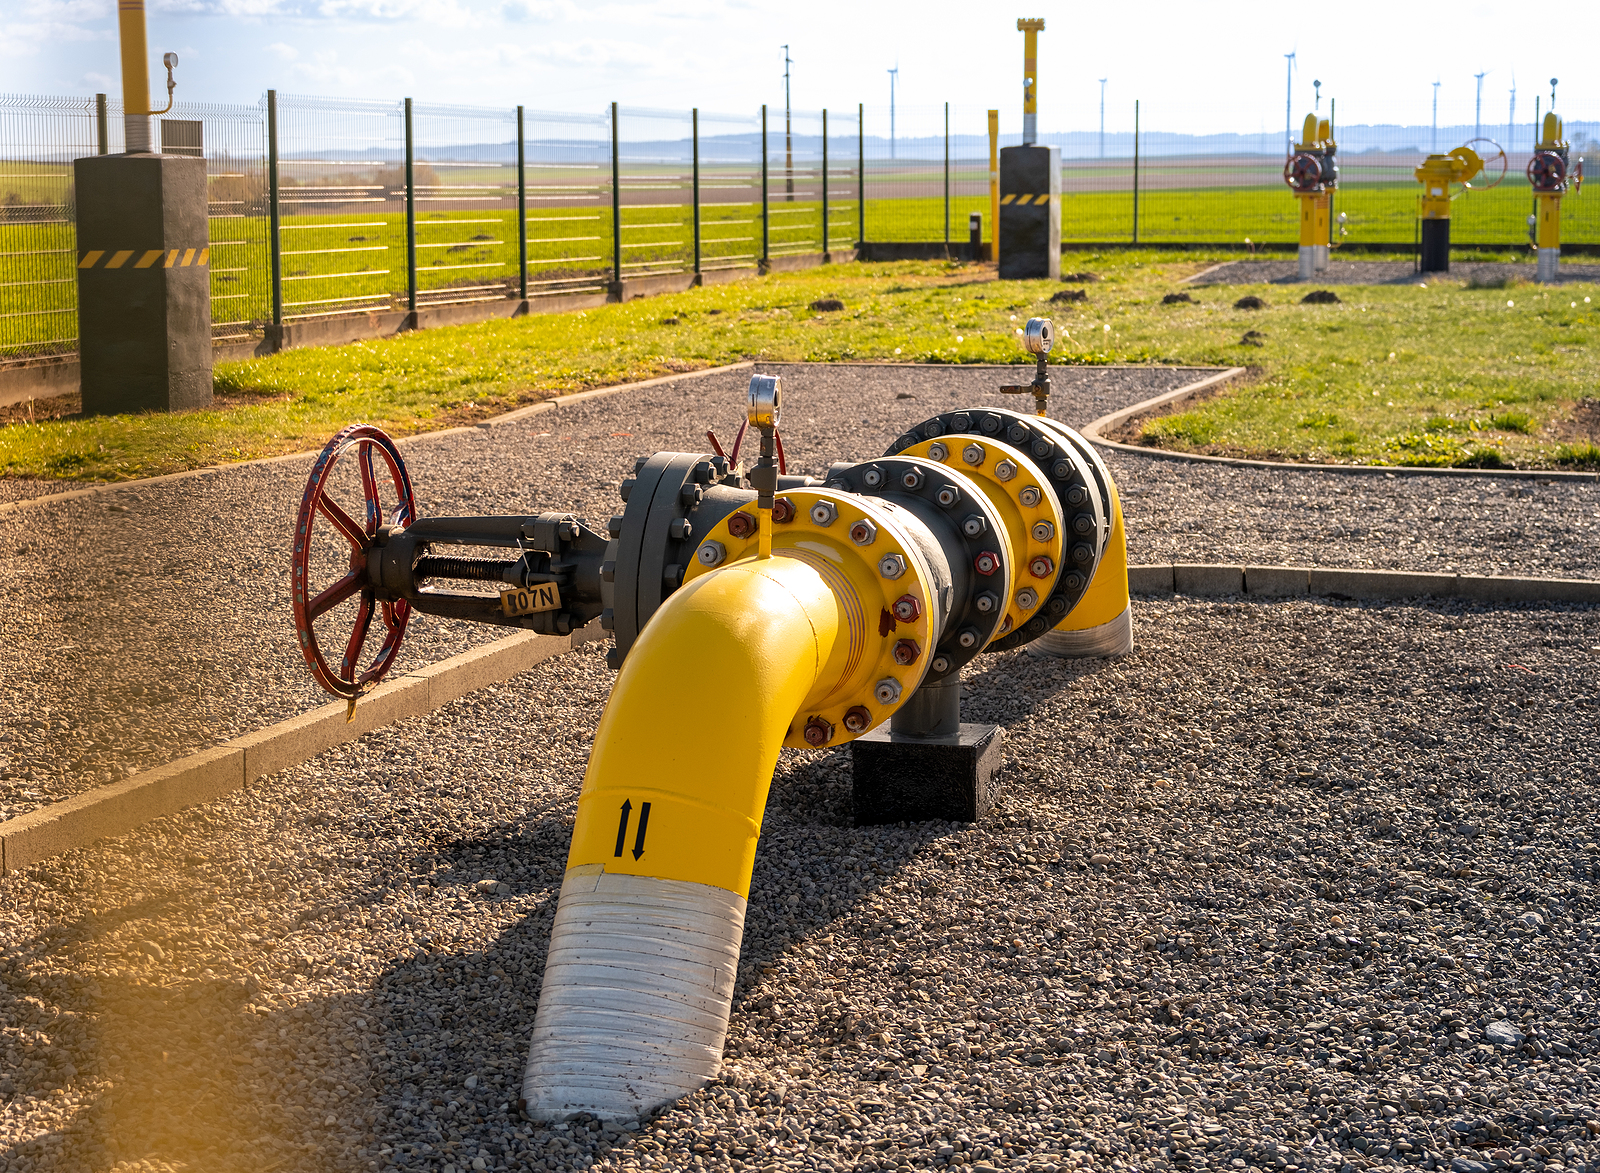 Gas pipes, natural gas transport system. Transmission infrastructure coming from the ground, yellow pipes with valve and flow meter on the background of the wind farm